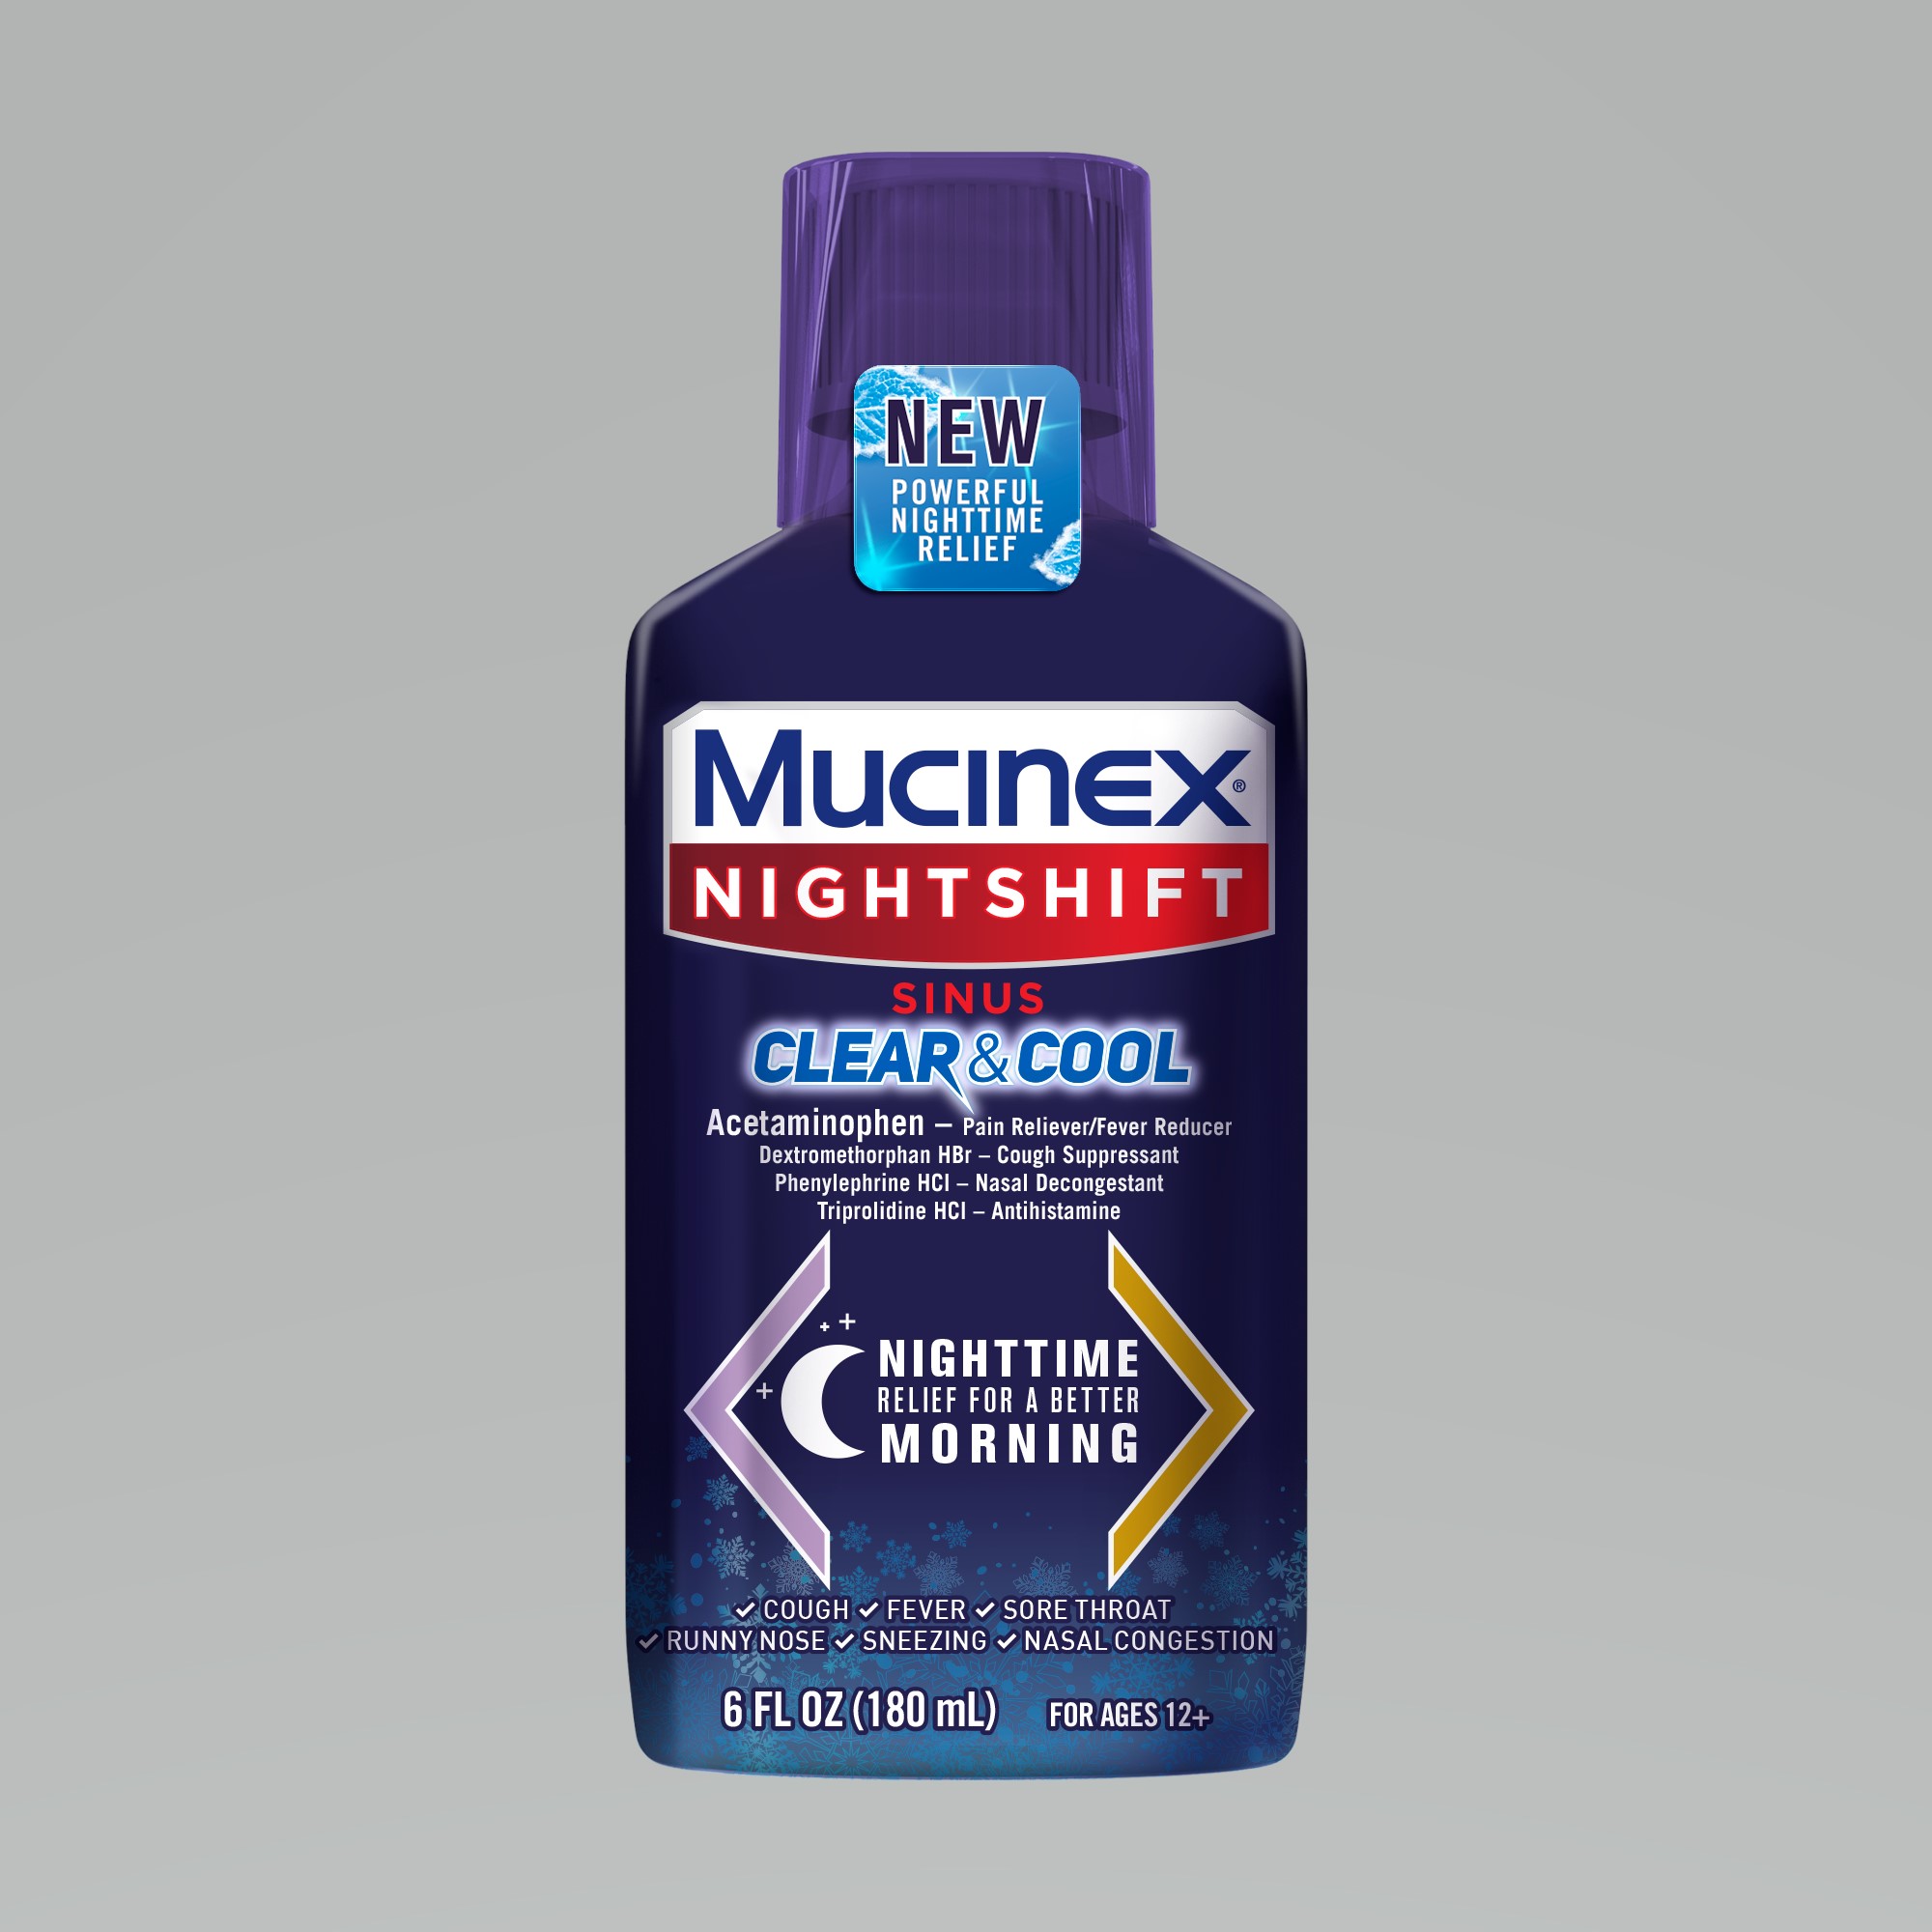 MUCINEX Nightshift Sinus Clear  Cool Discontinued